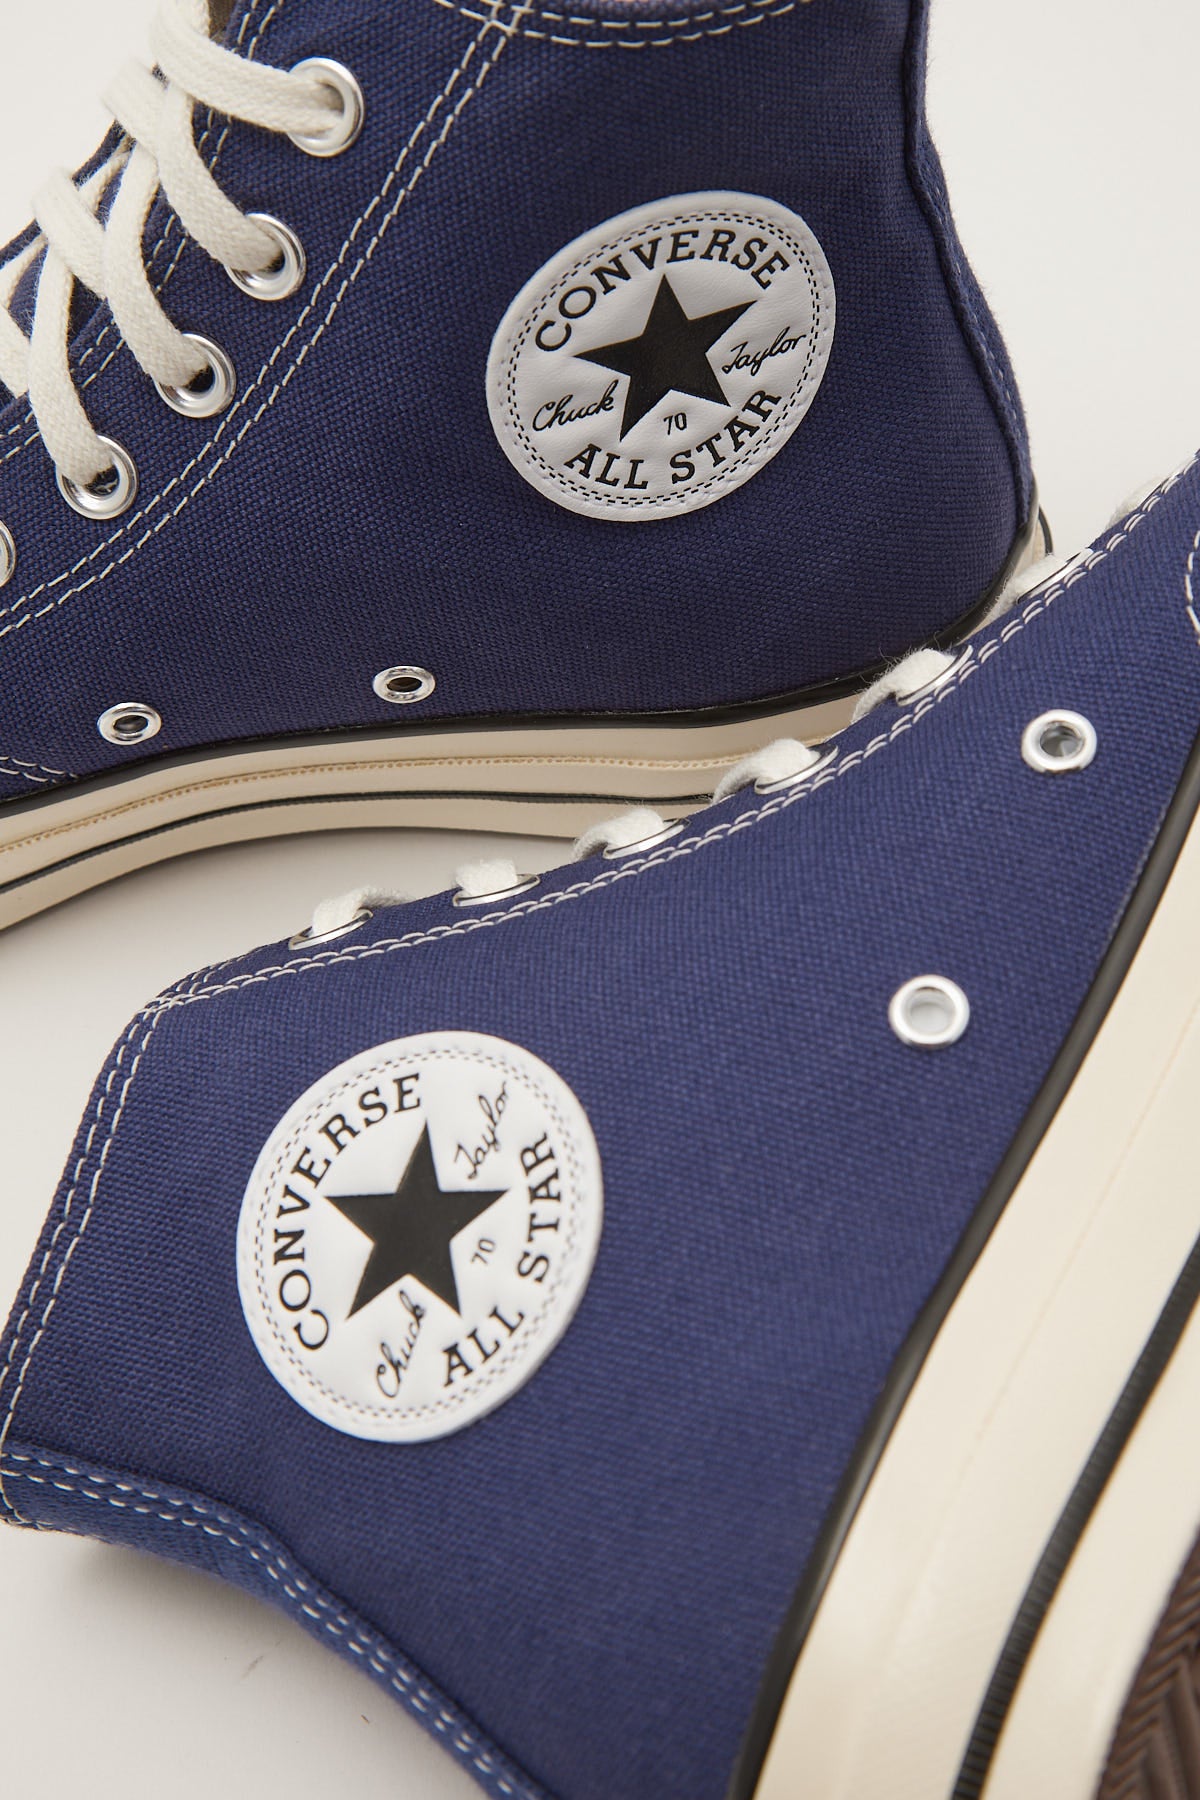 Converse Chuck 70s Unchatered Waters